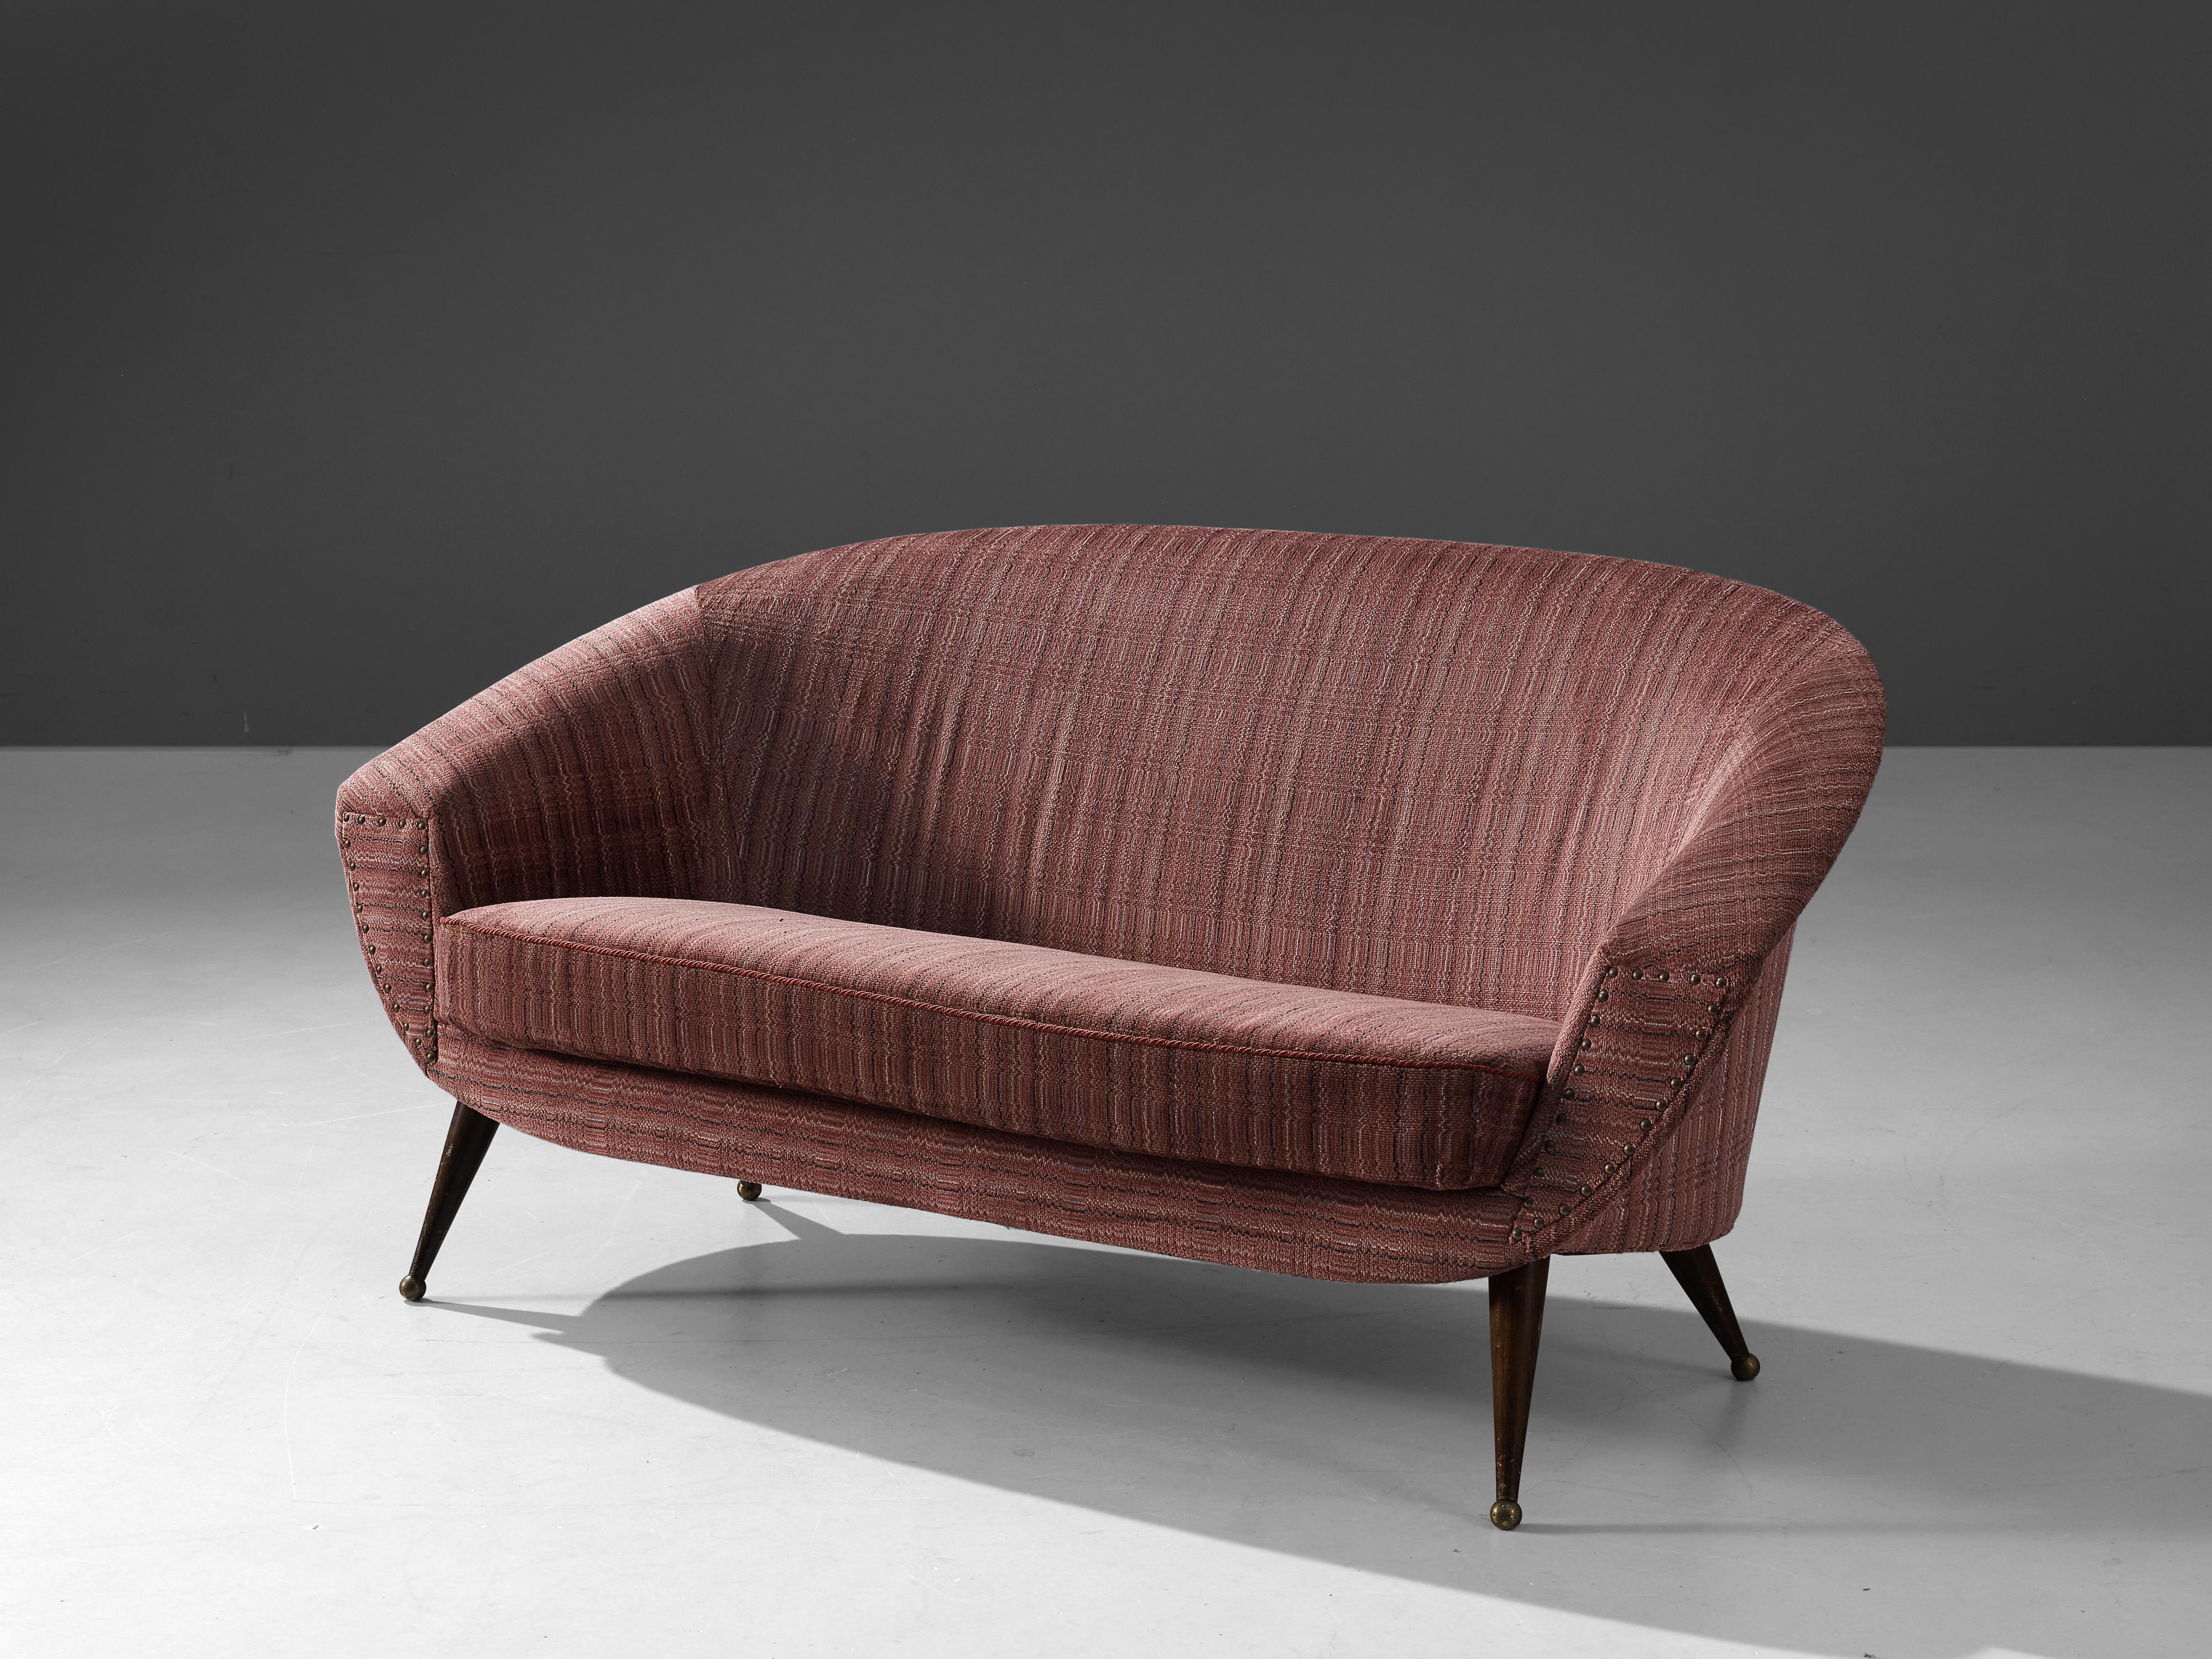 Folke Jansson 'Tellus' Sofa in Dusty Rose Upholstery In Good Condition For Sale In Waalwijk, NL